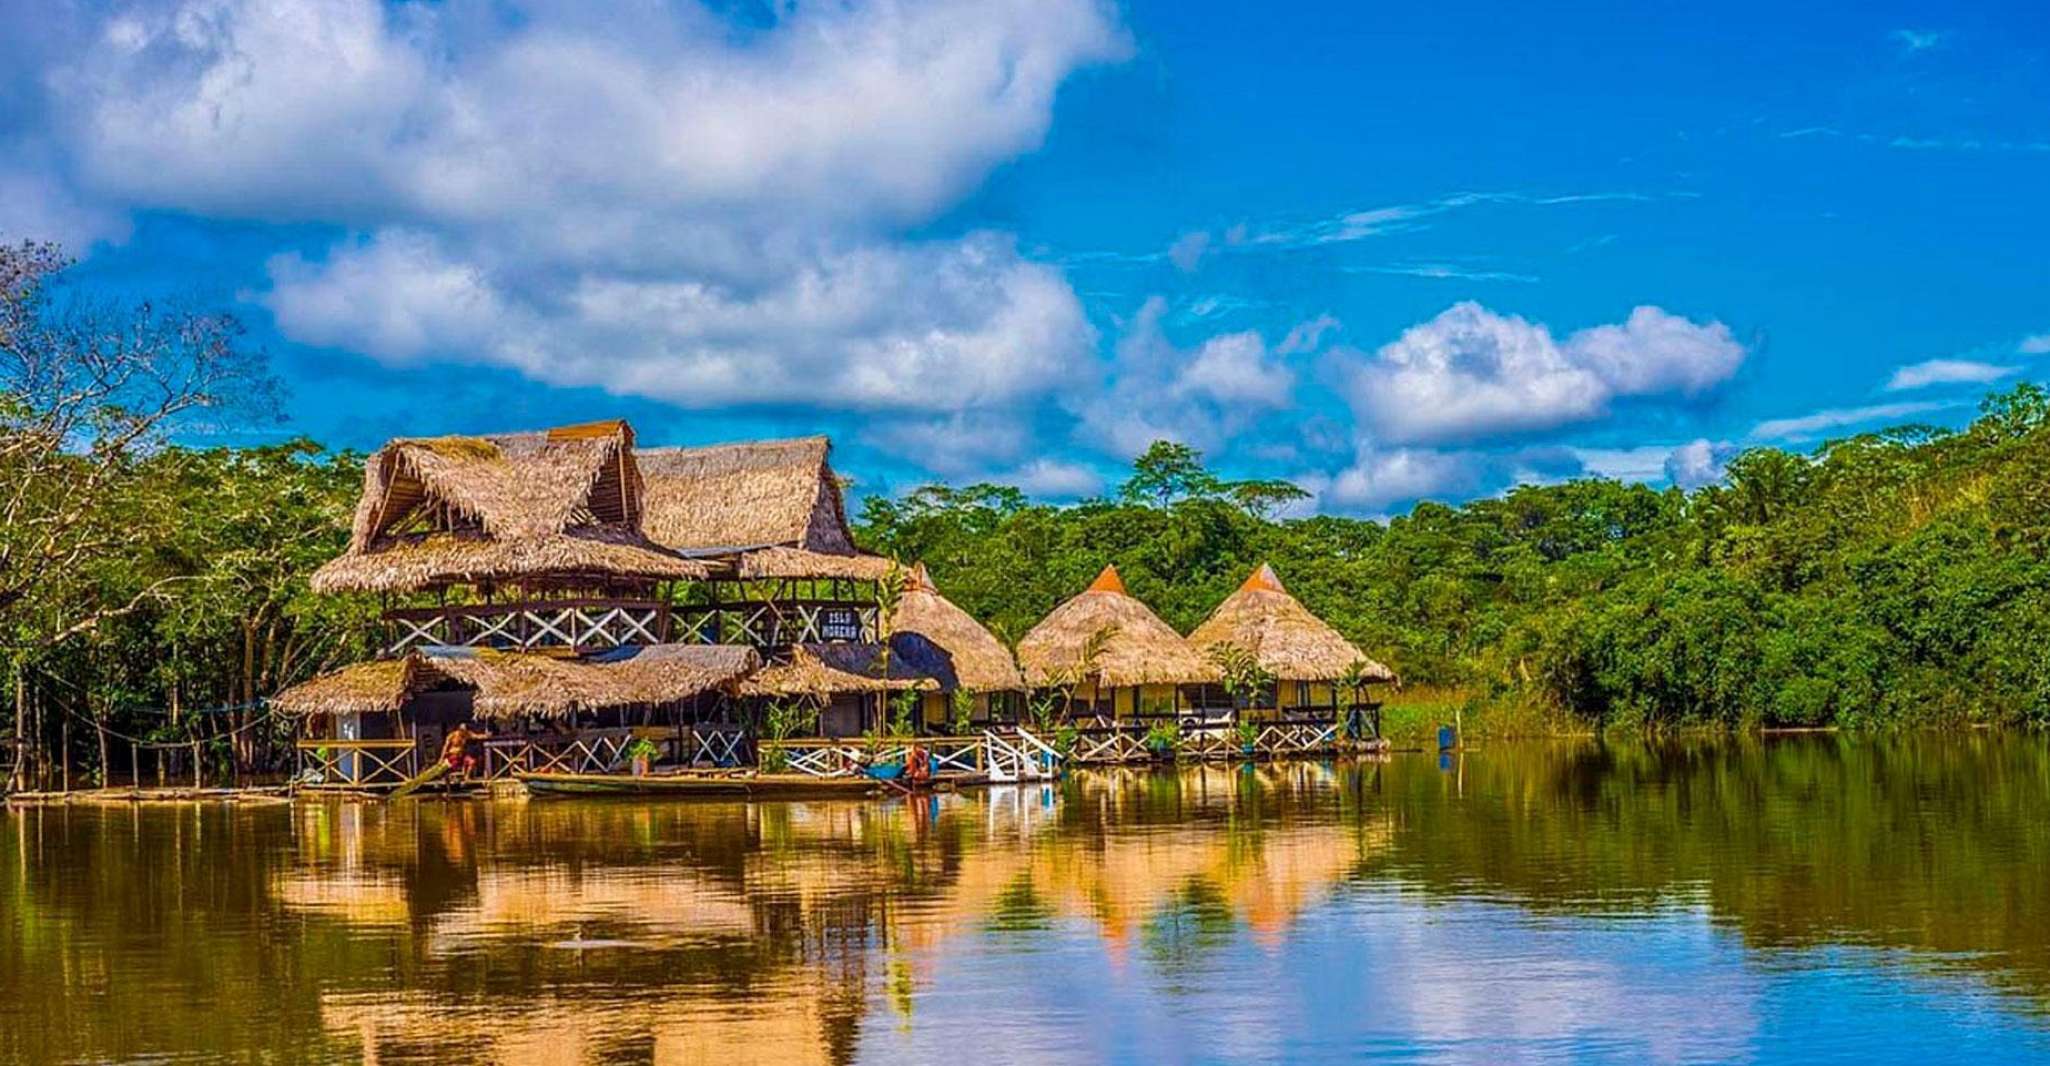 Iquitos || 2 days in the Amazon, natural wonder of the world - Housity